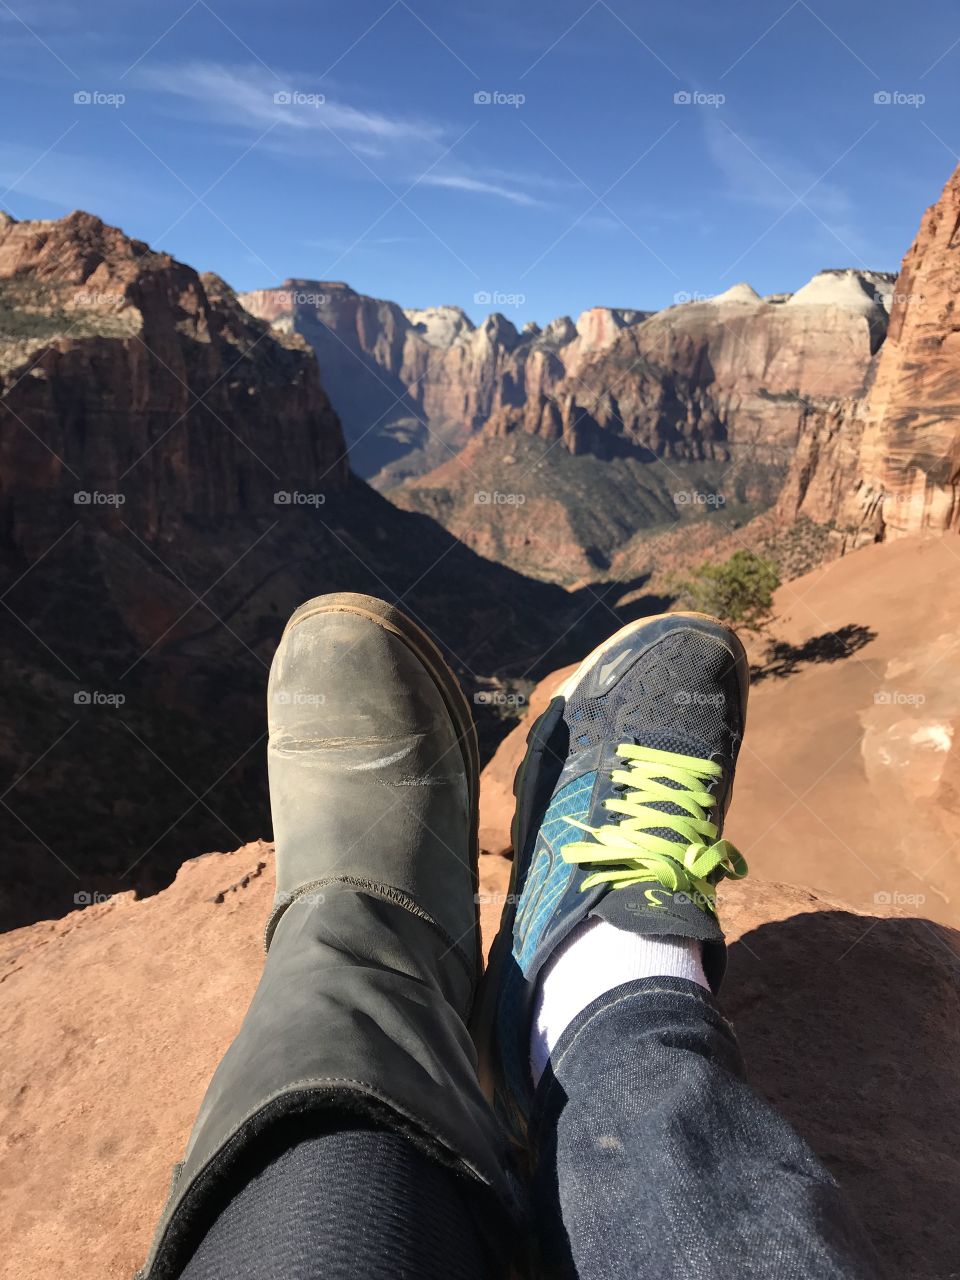 Feet up at Zion National park